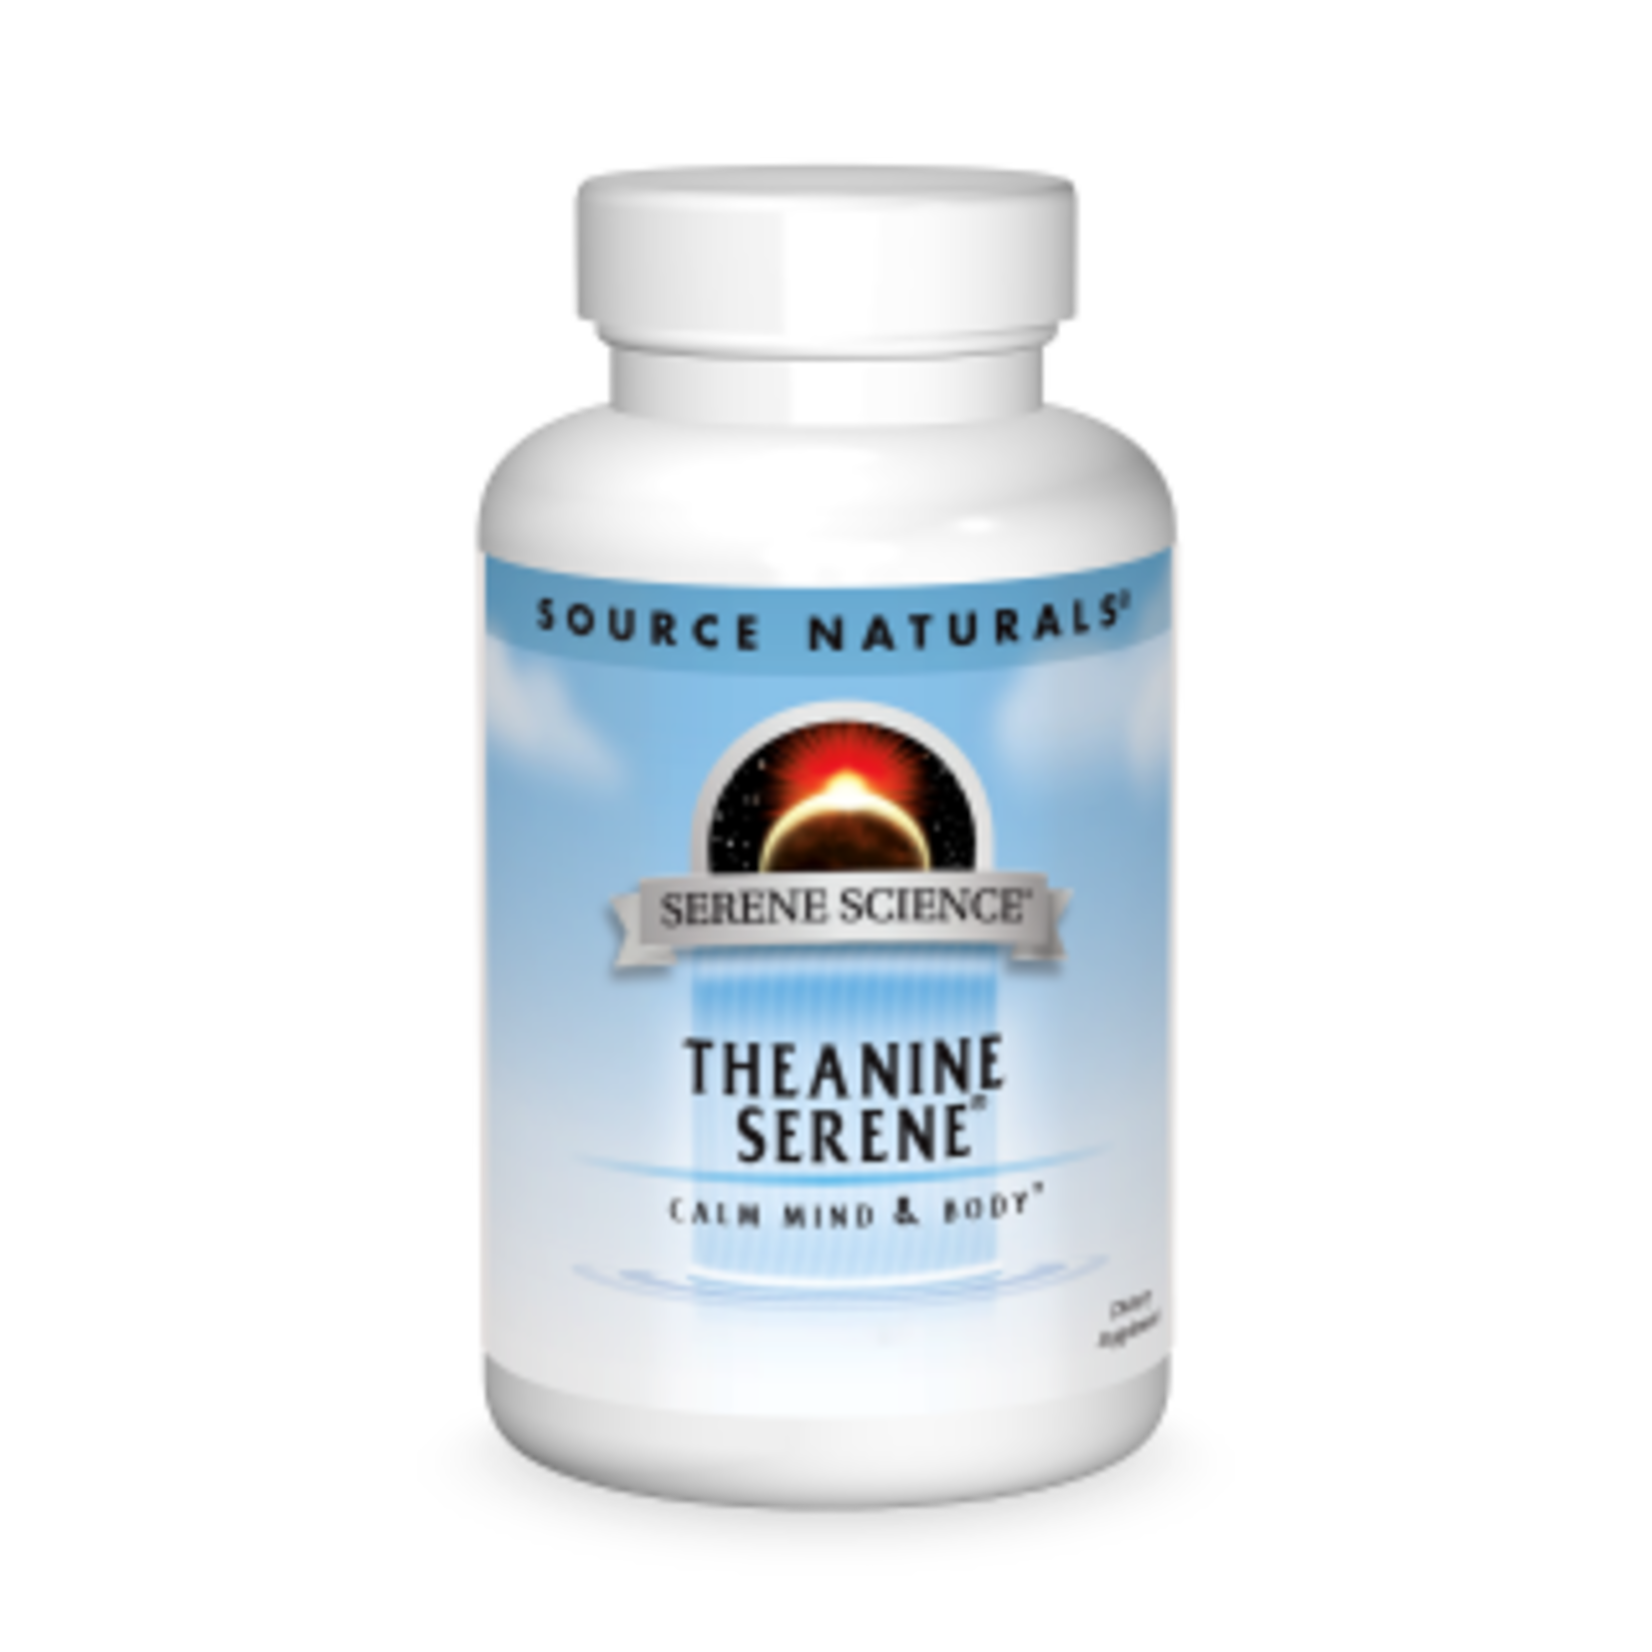 Source Naturals Source Naturals - Theanine Serine - 60 Tablets